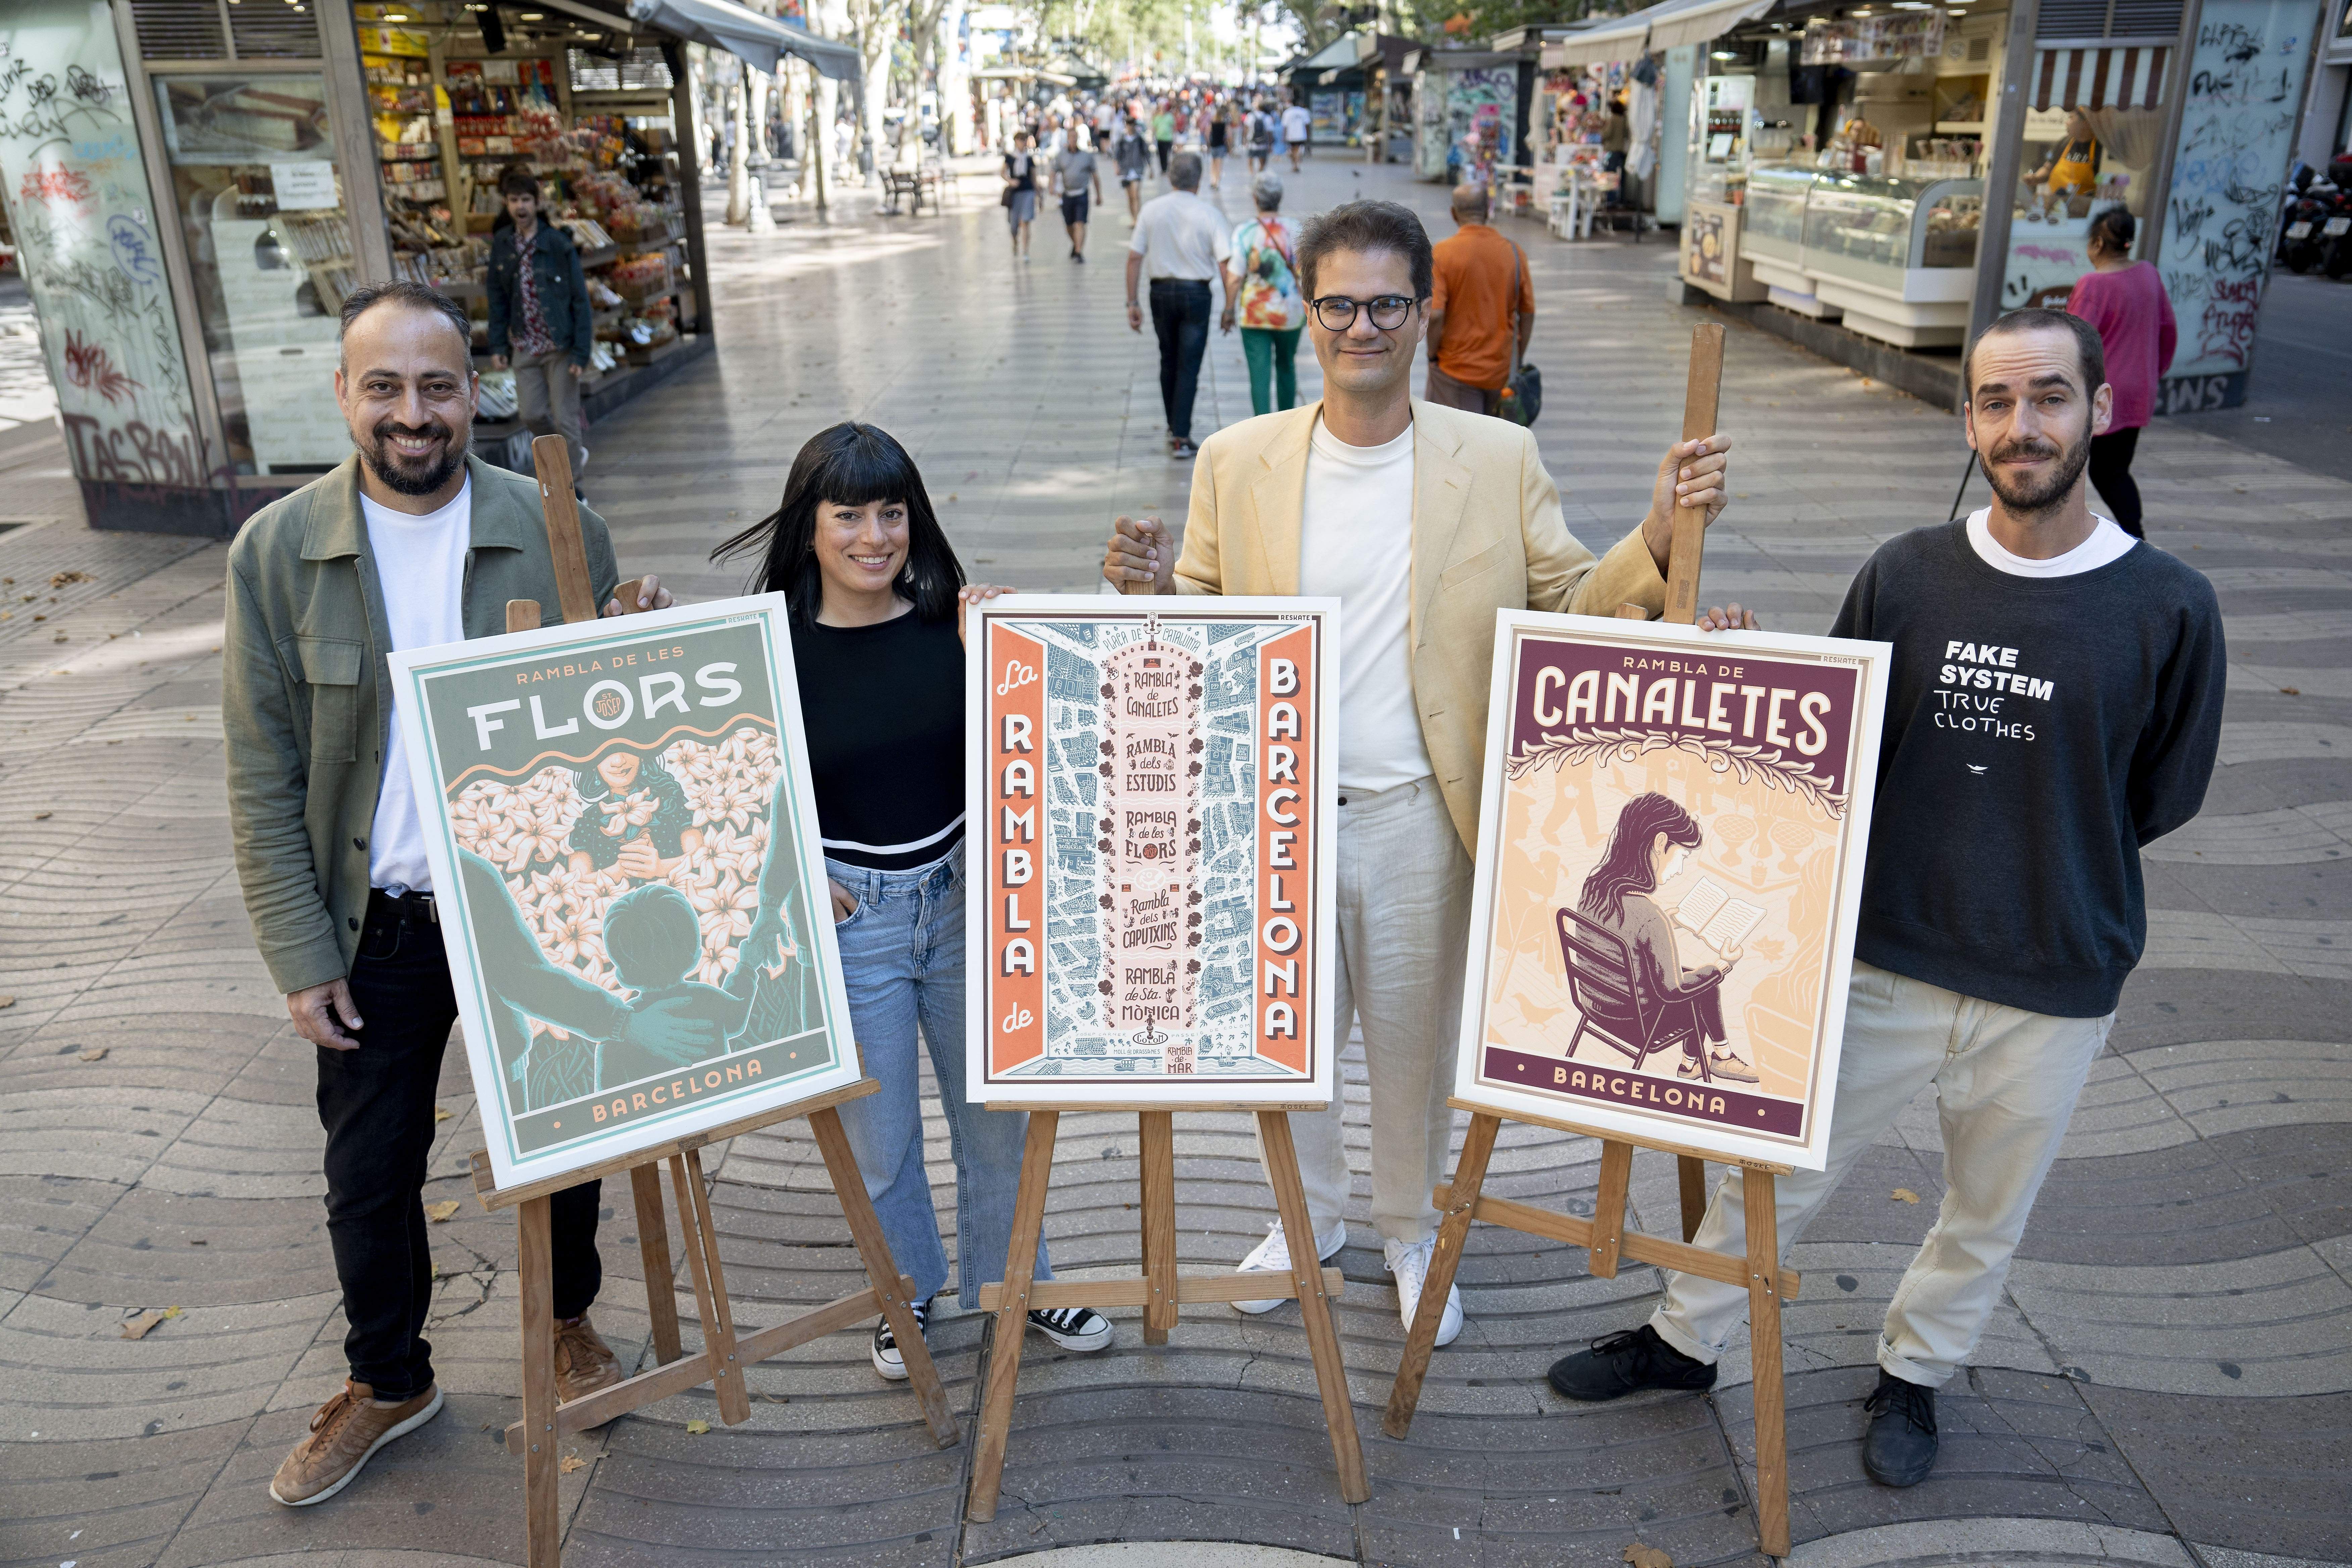 Souvenirs intended for the locals: these are the new (old) posters of La Rambla